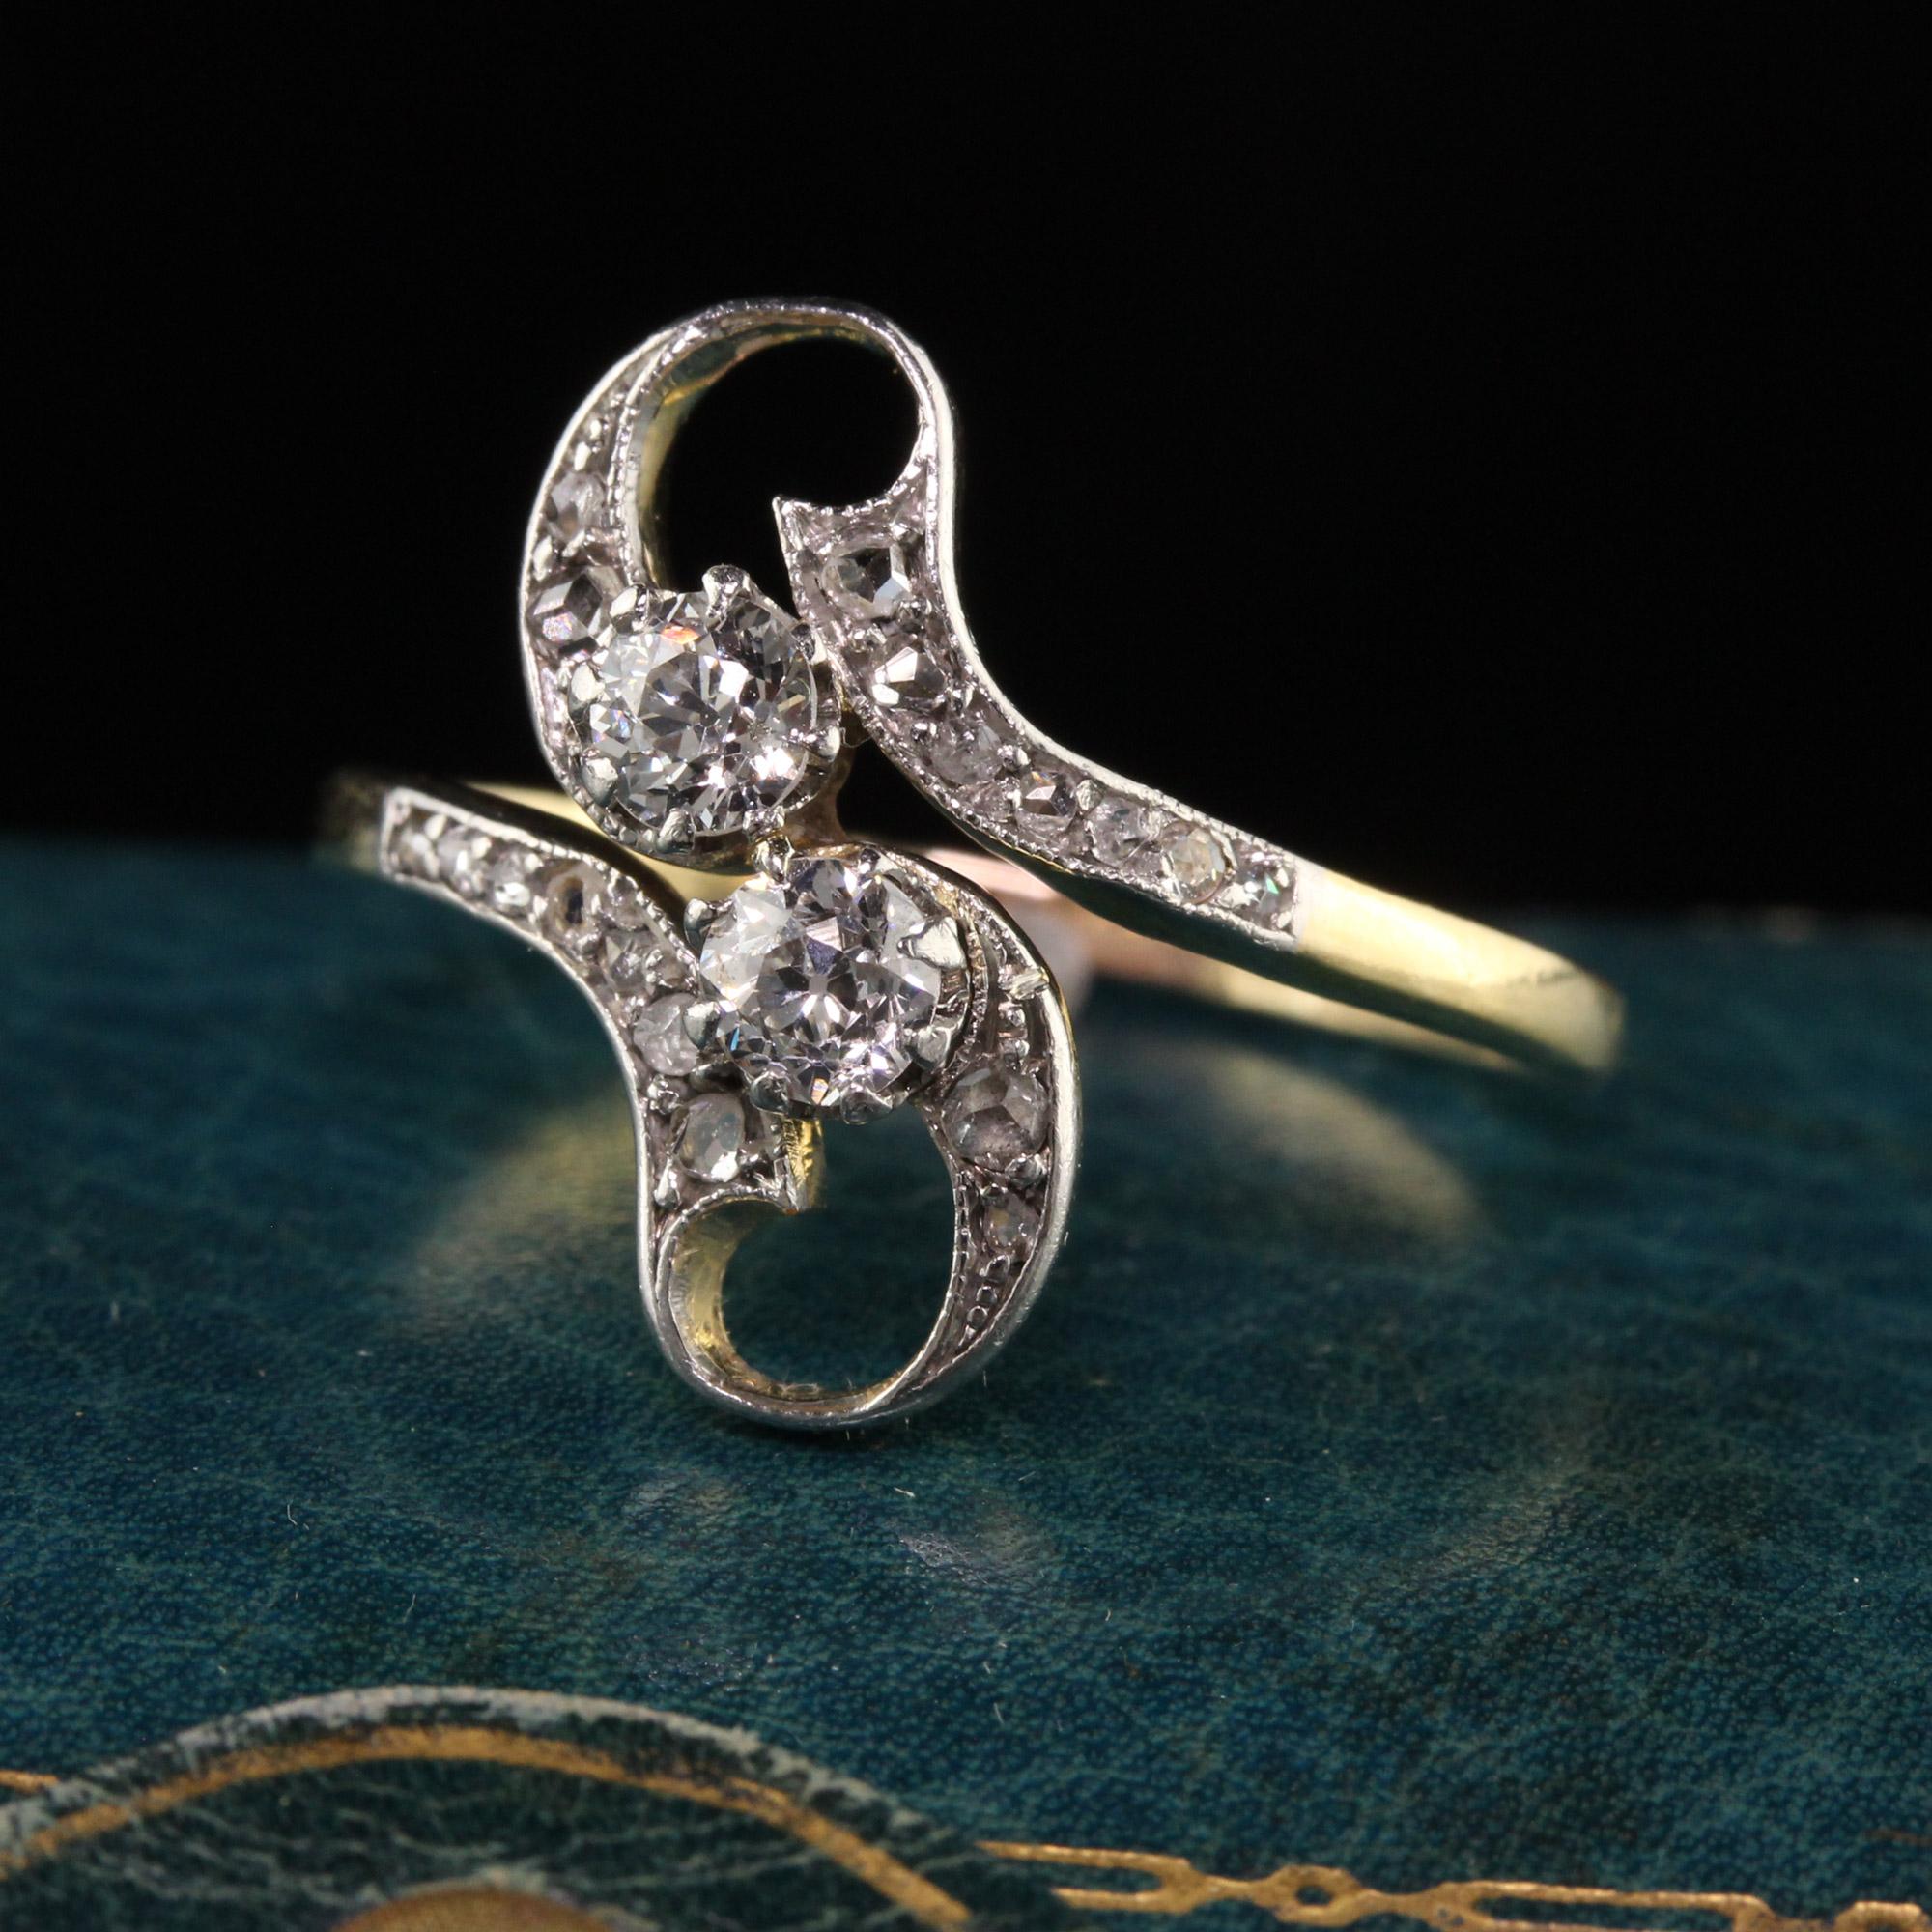 Beautiful Antique Edwardian 18K Yellow Gold Old Mine Rose Cut Diamond Toi et Moi Ring. This gorgeous Edwardian ring is crafted in 18K yellow gold and platinum top. This ring has old mine cuts in the center with rose cuts going down the sides and